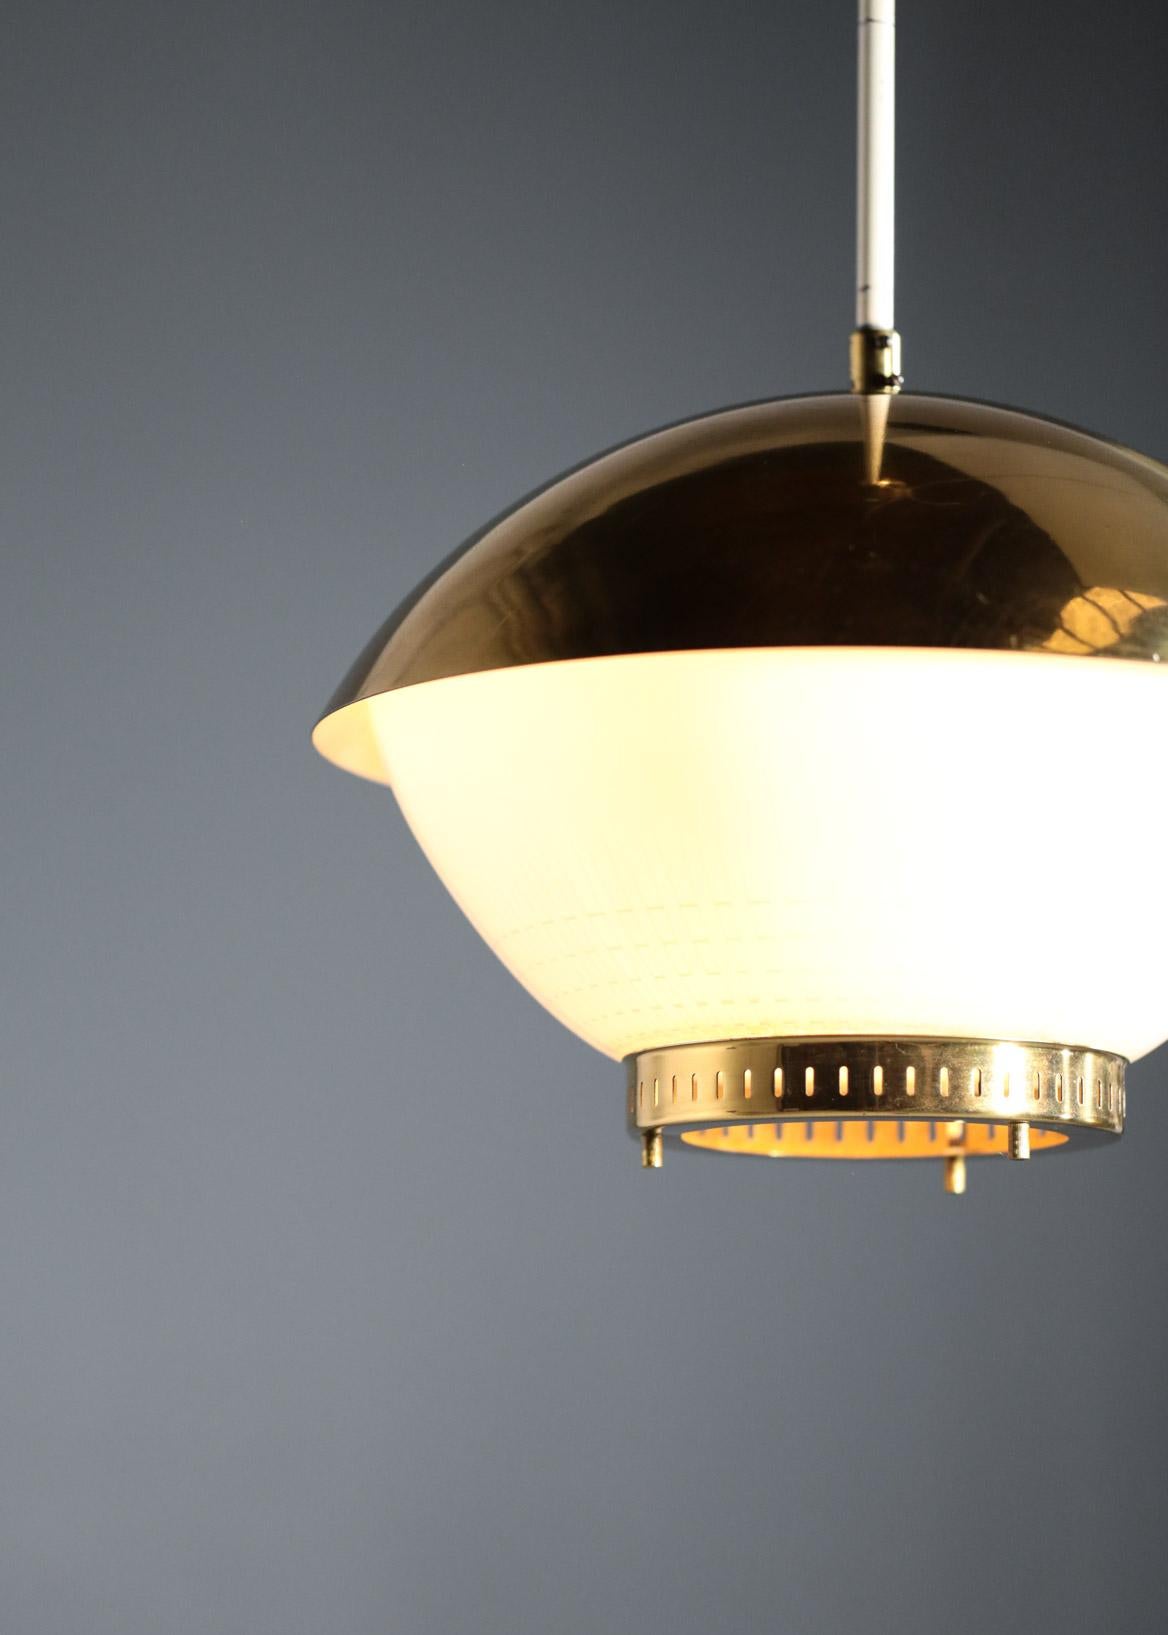 Vintage pendant by Zukov form 1950s.
In the style of Paavo Tynell.